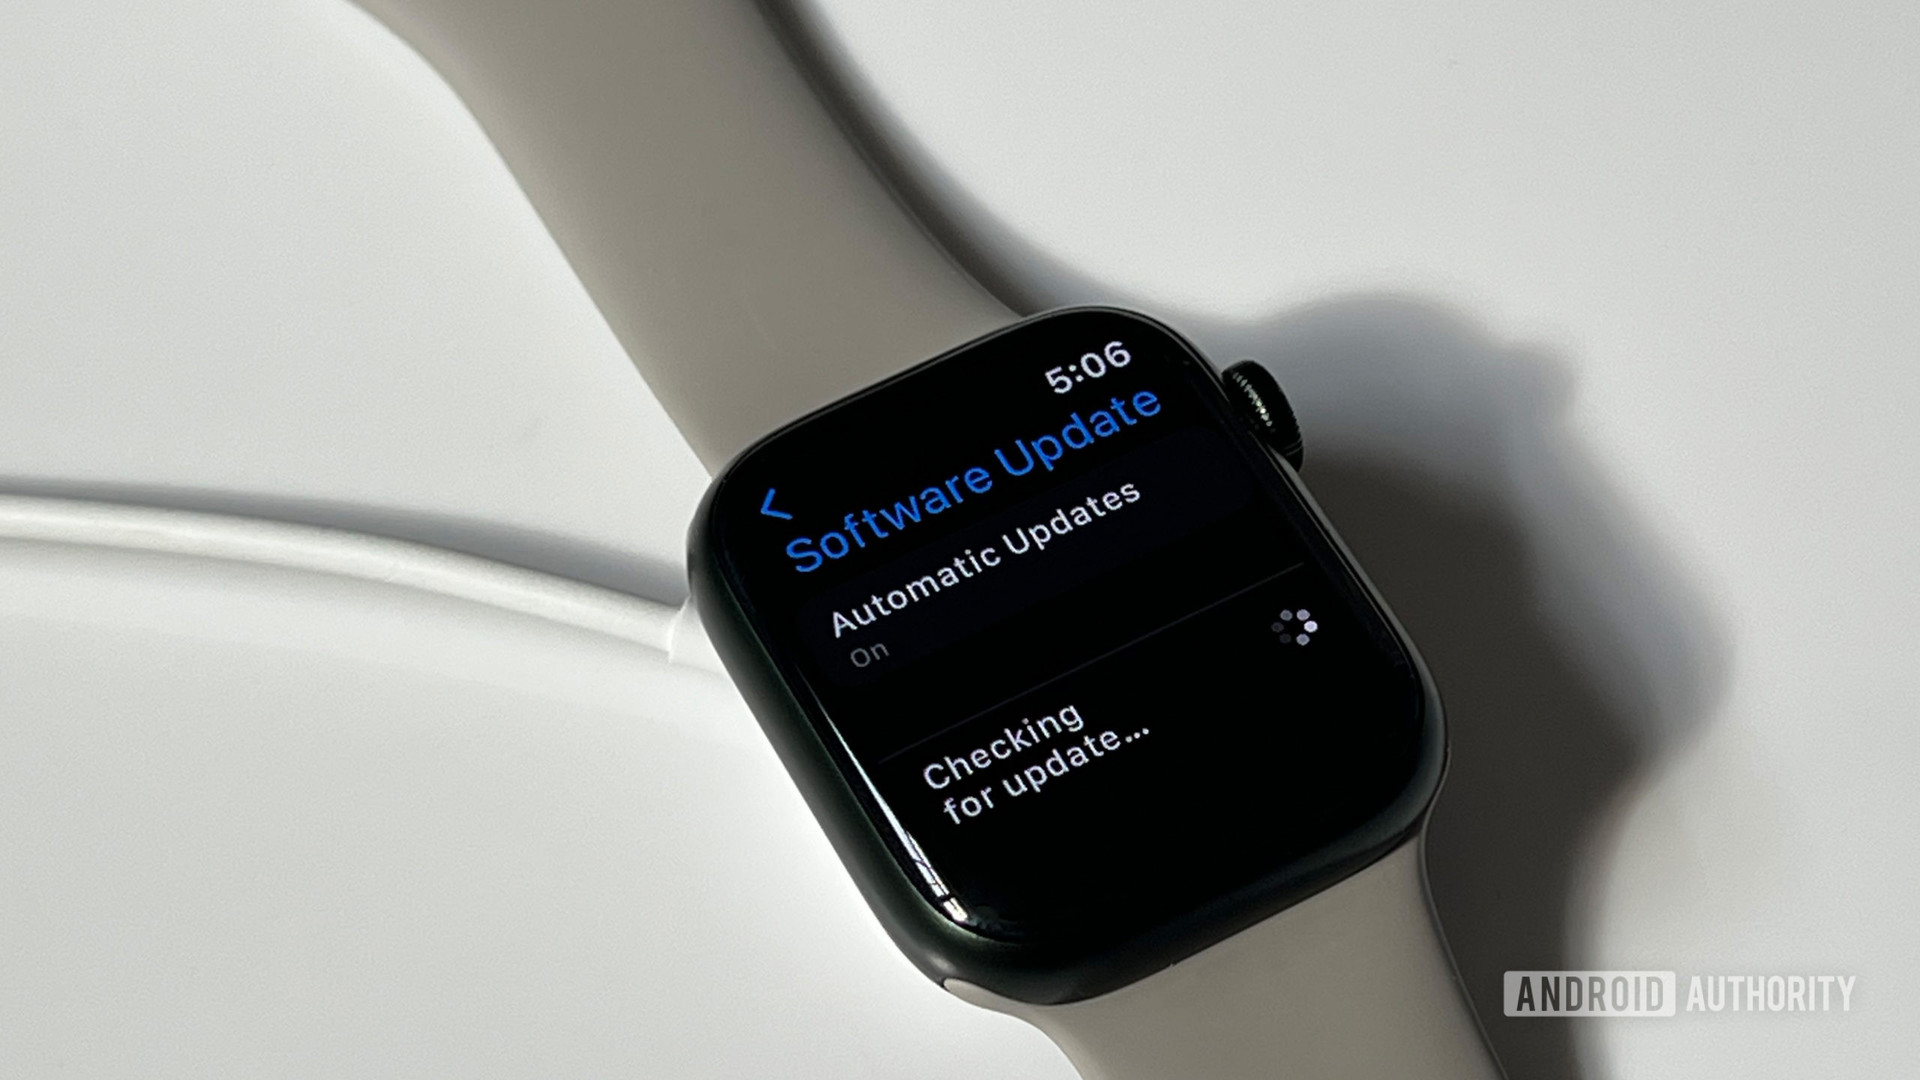 An Apple Watch Series 7 checks for available software updates while resting on its charger.